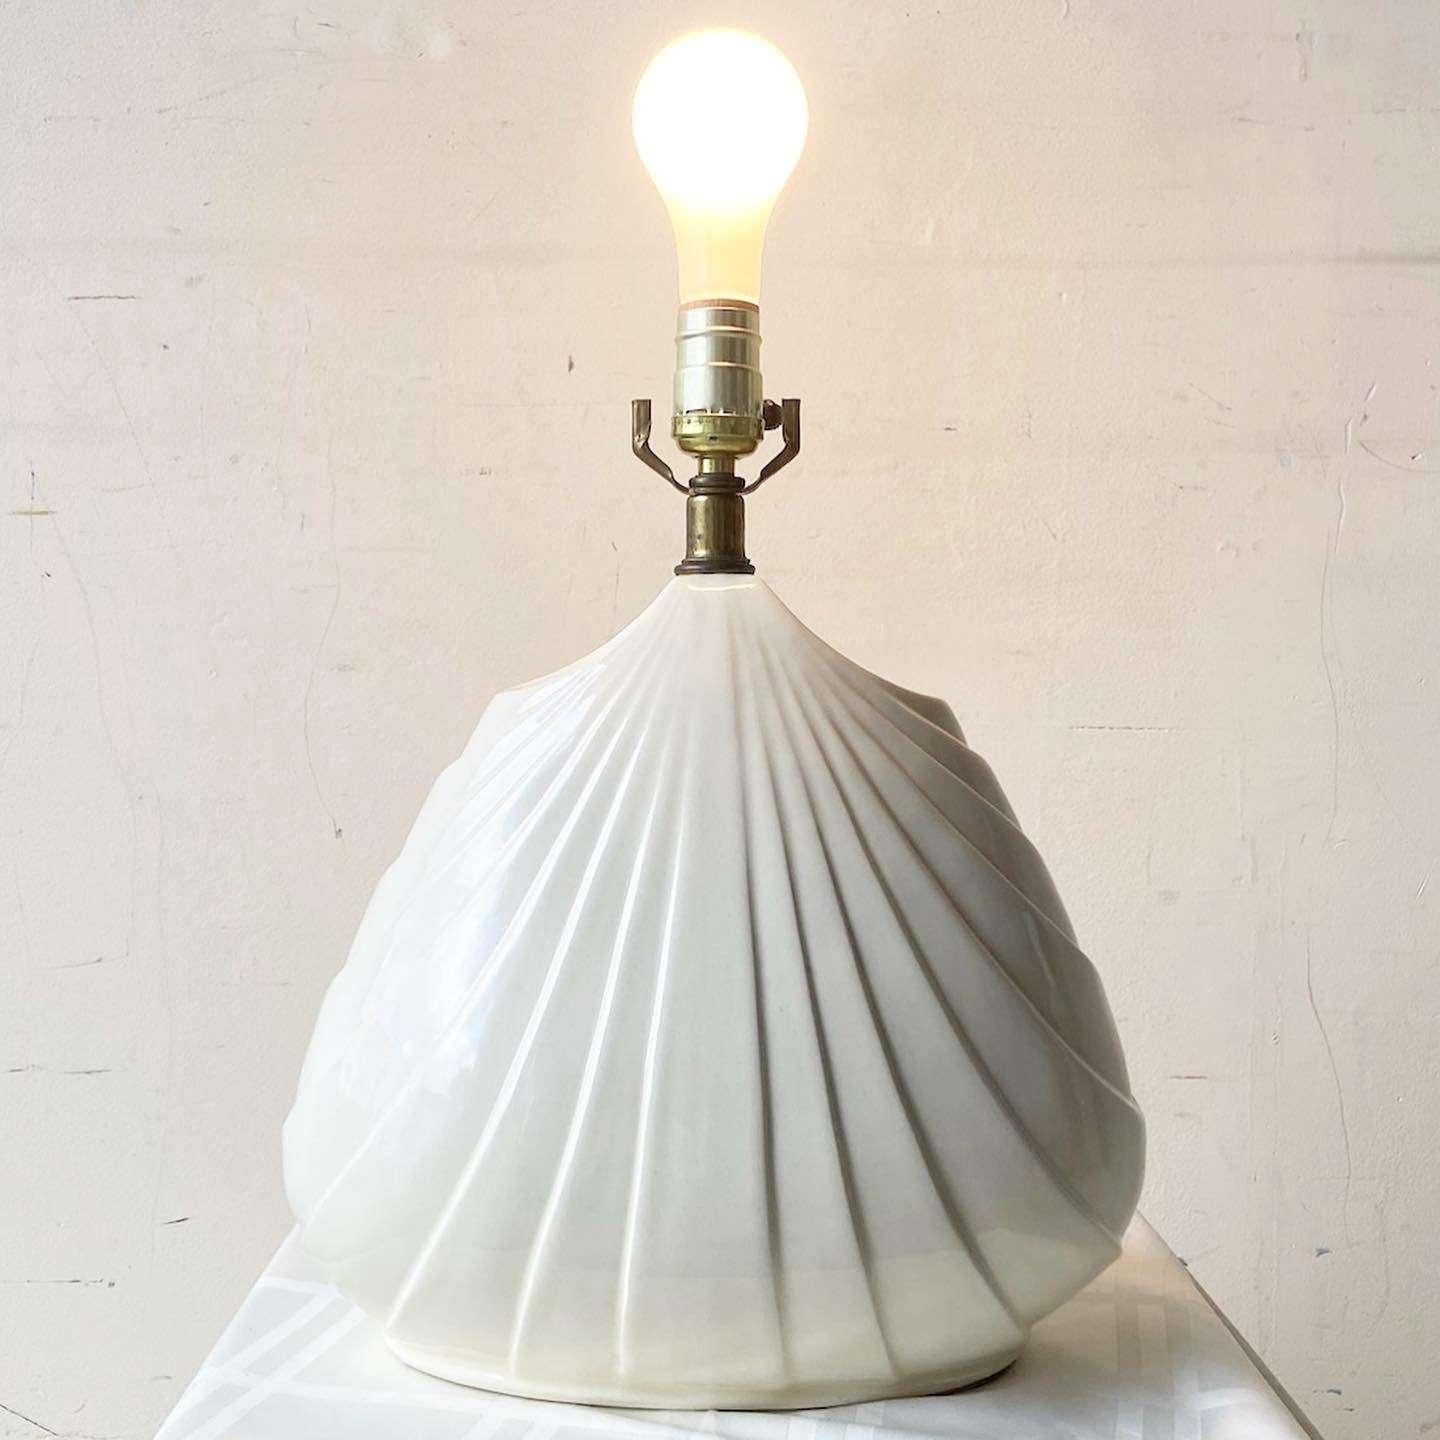 Amazing vintage postmodern sculpted ceramic table lamp. Features a fantastic body with a glossy beige finish.
